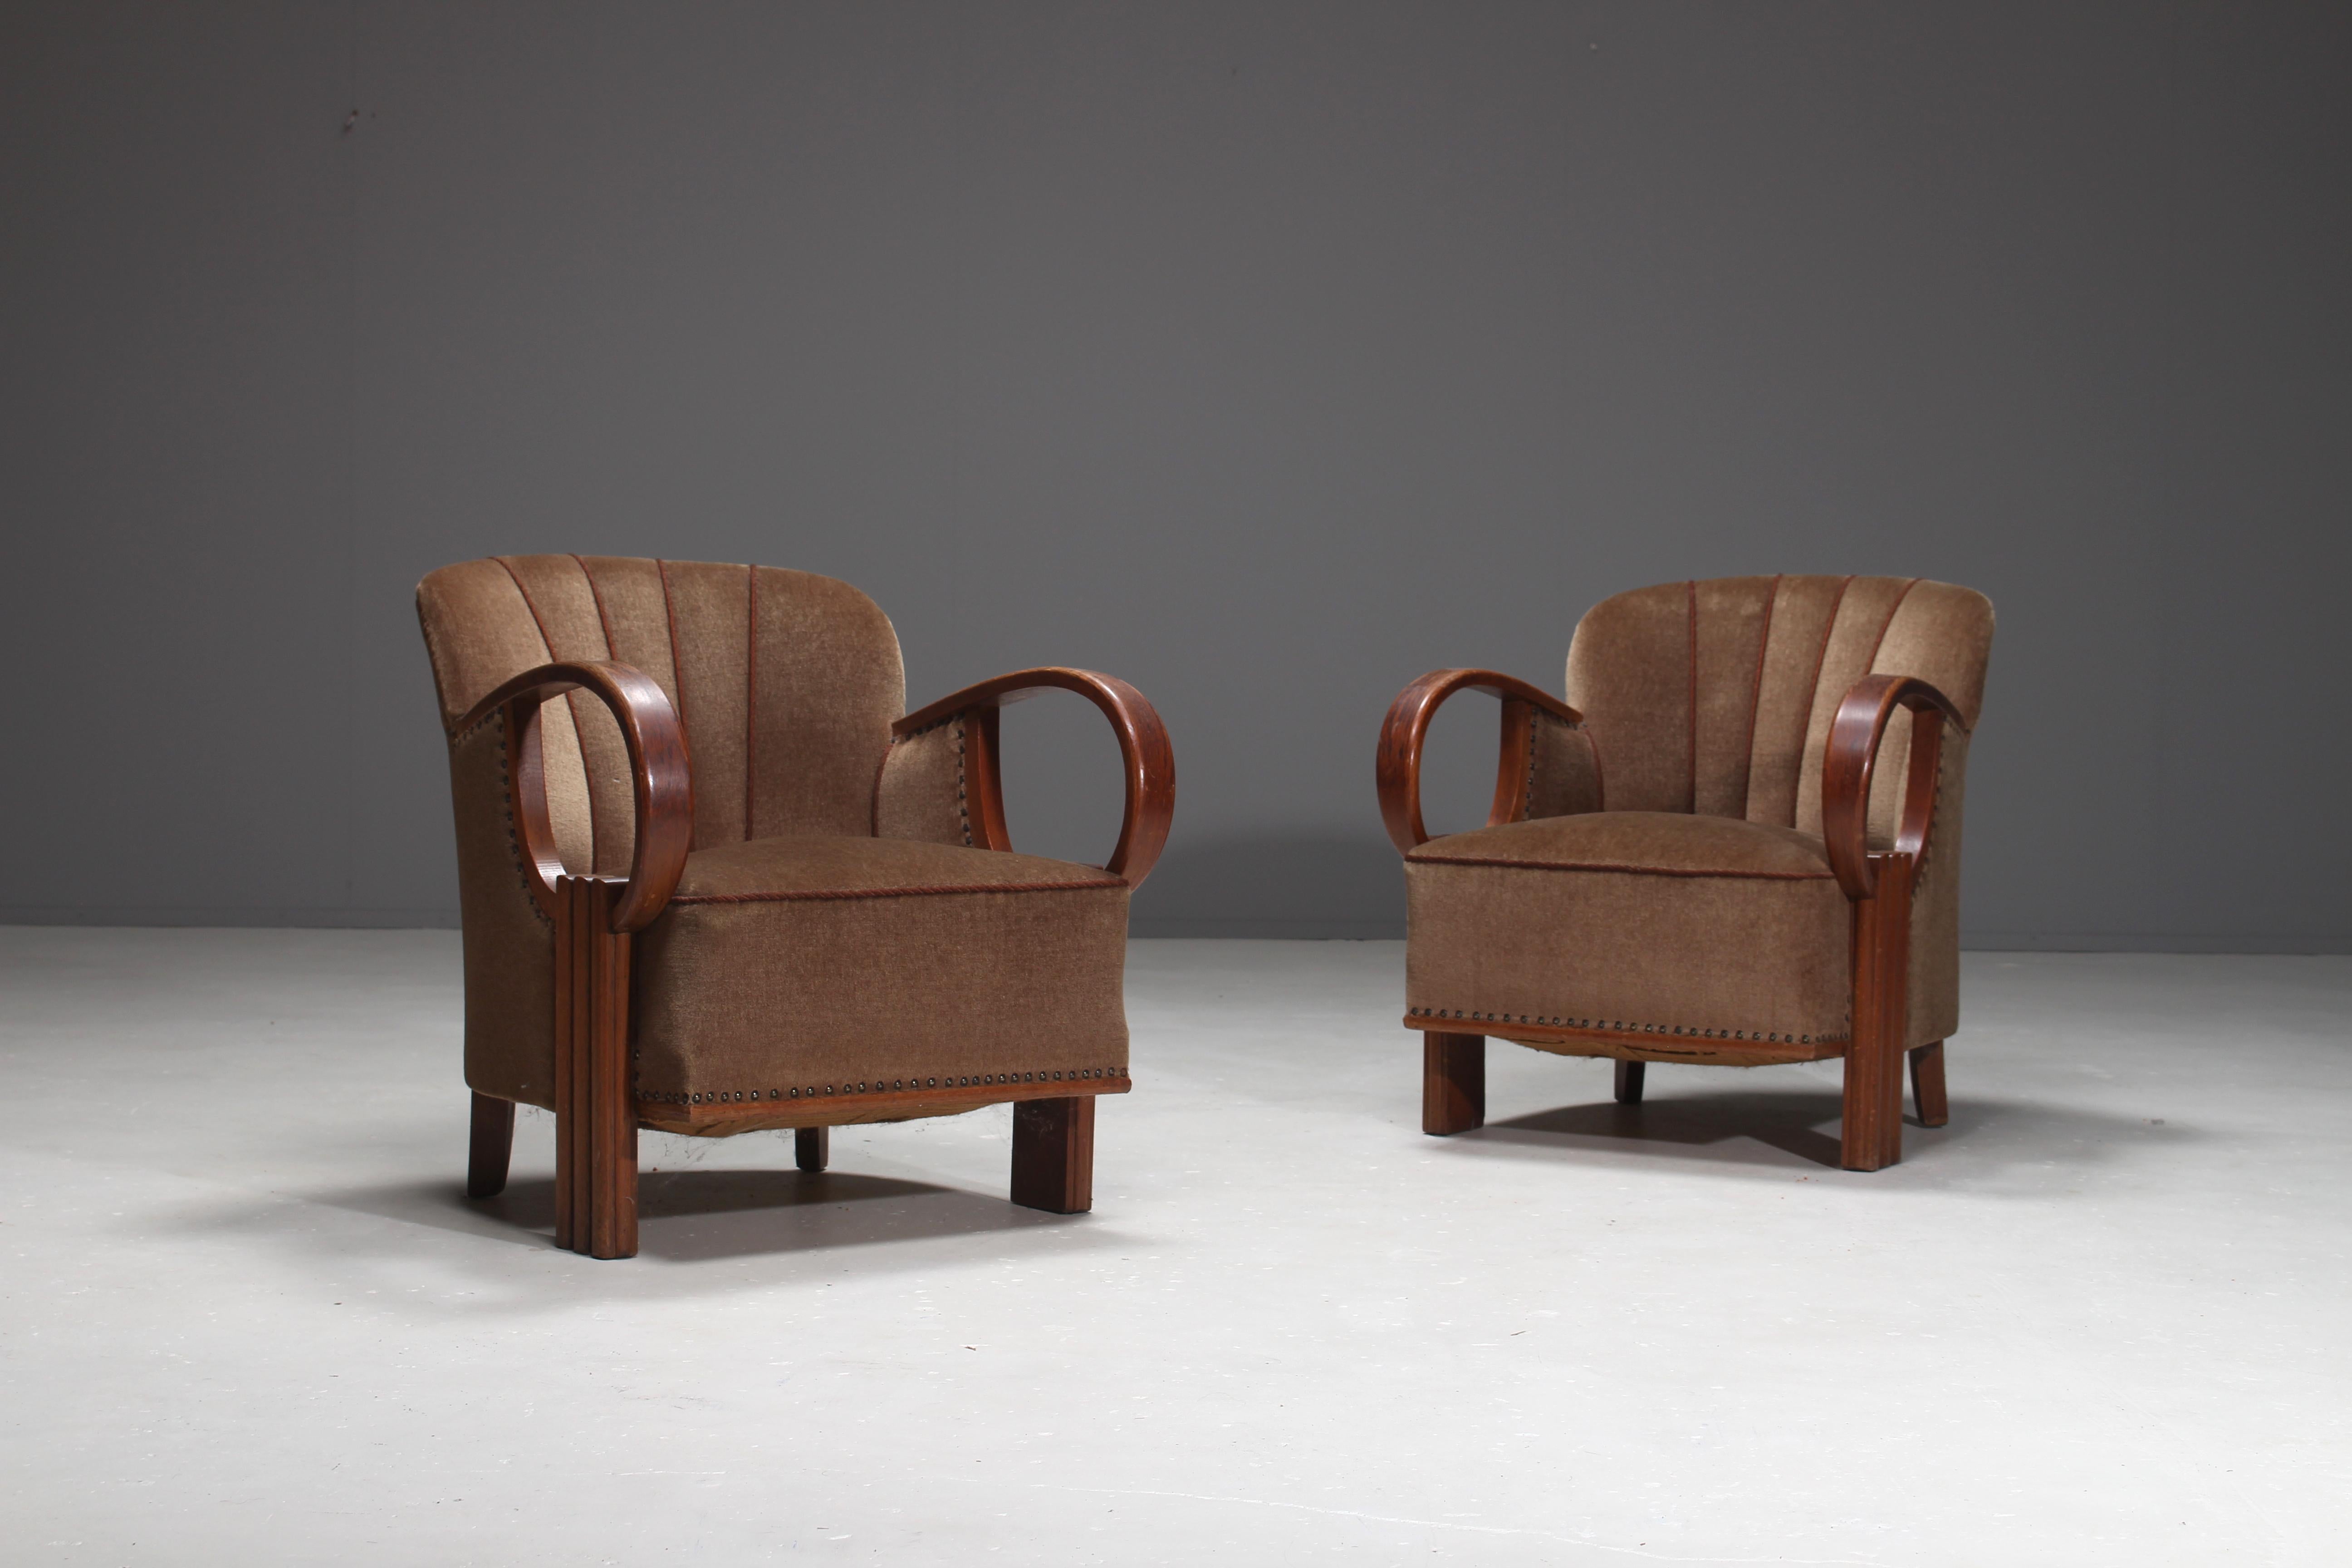 Pair of French Jean Pascaud Style Art Deco Club Chairs in Oak and Velvet, 1930s For Sale 6